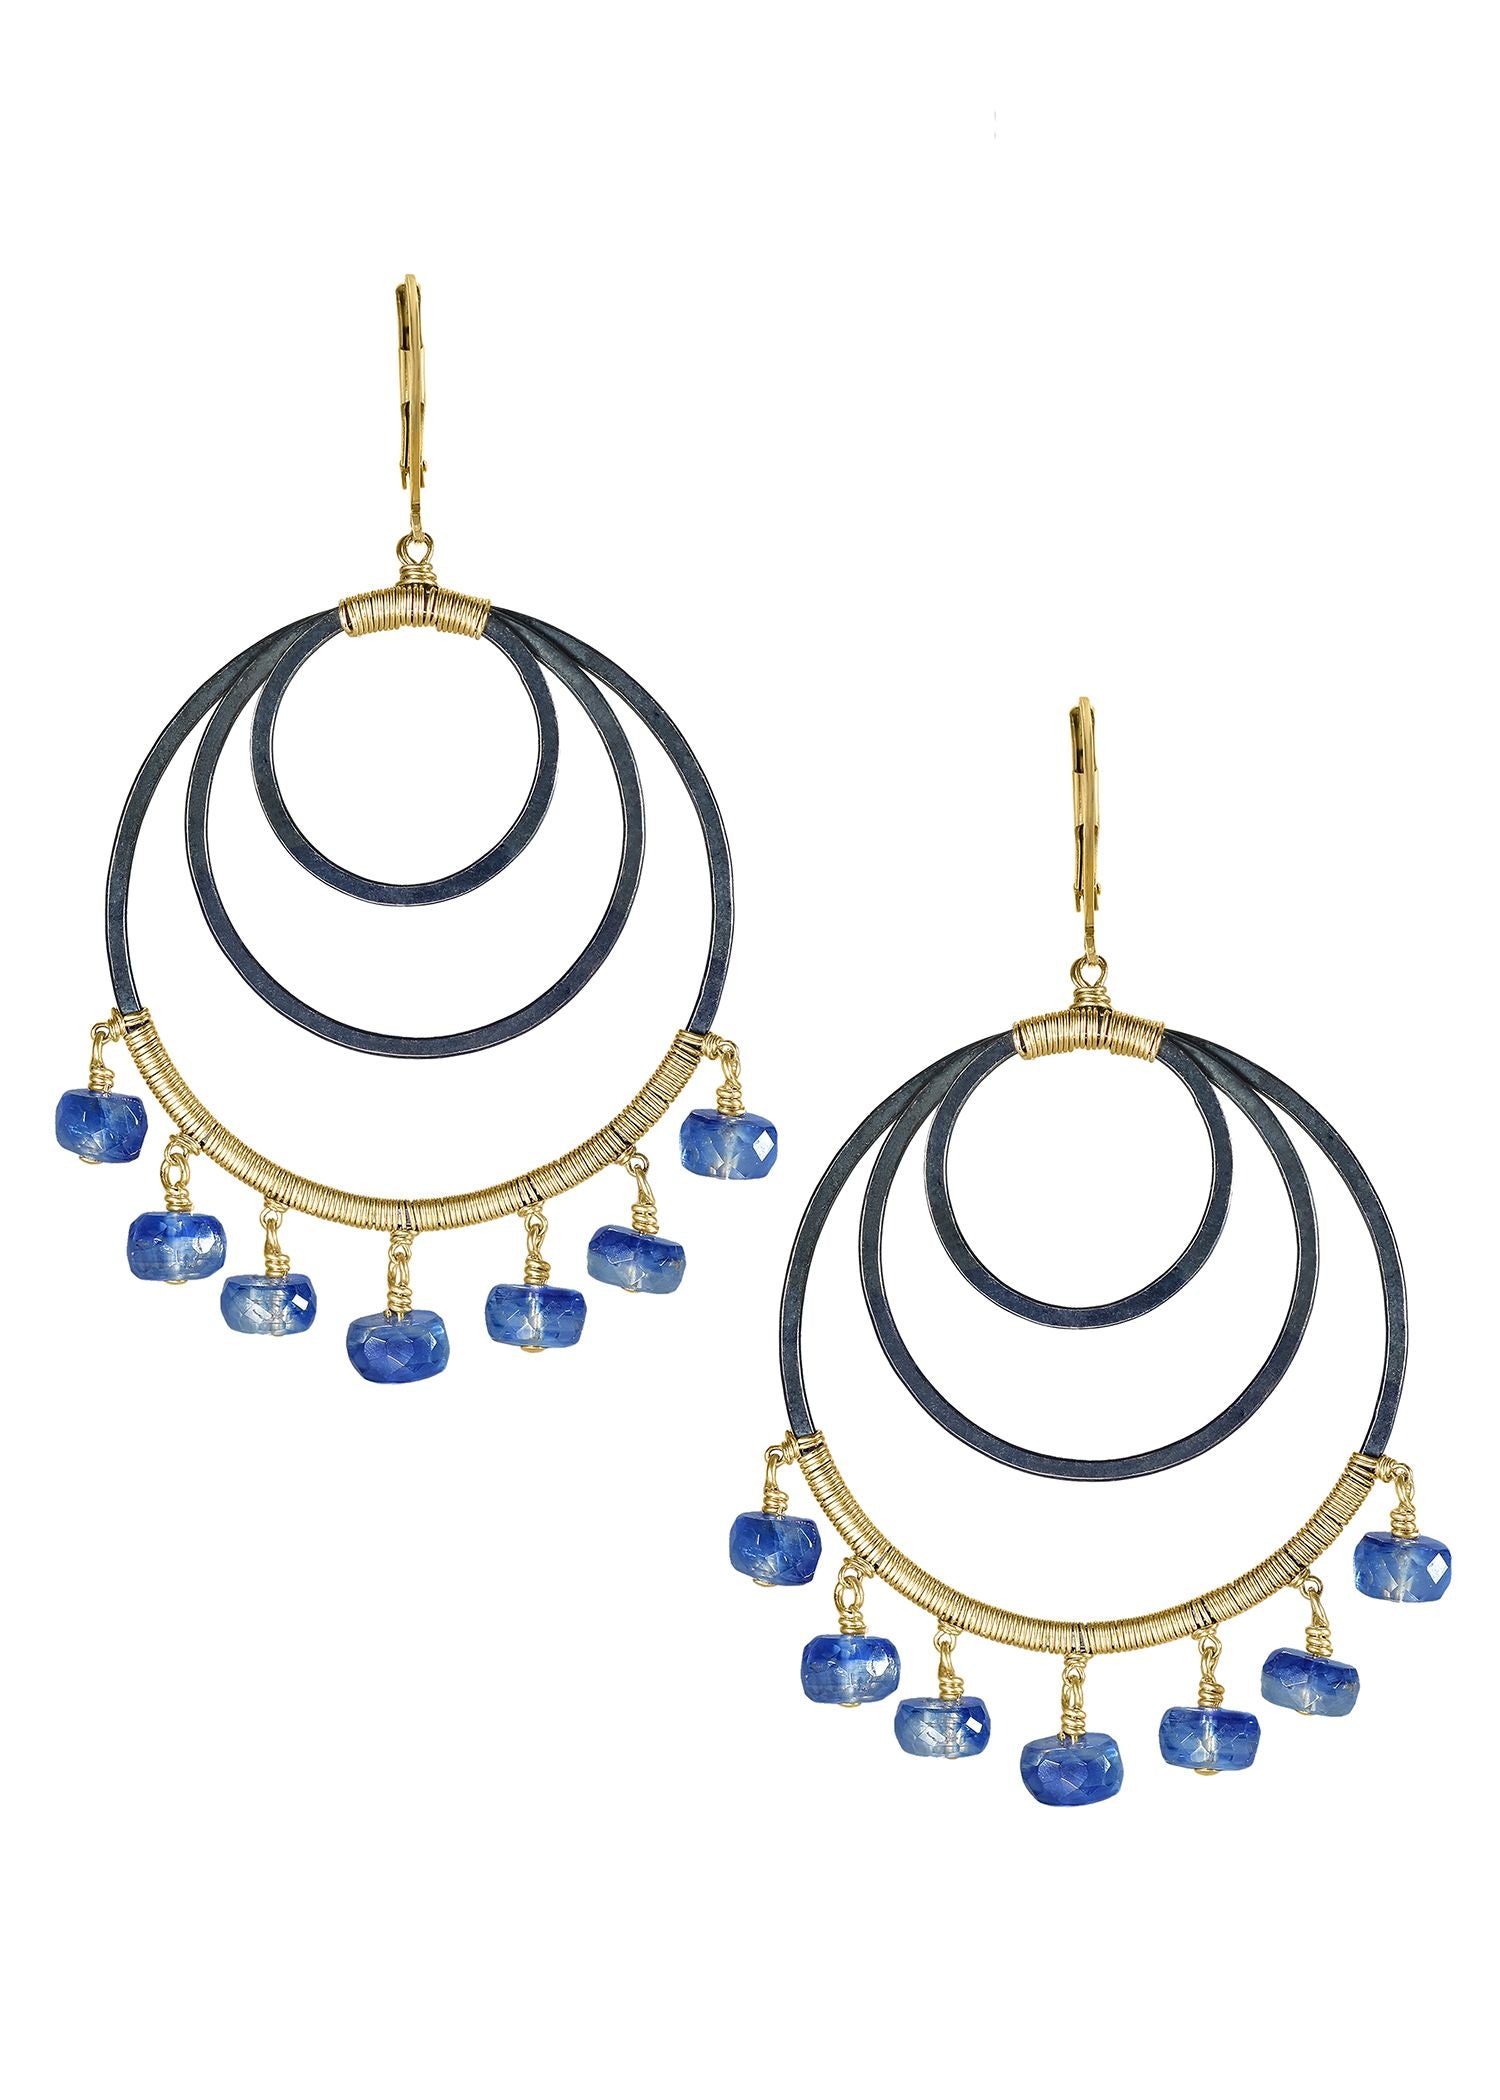 Kyanite 14k gold fill Blackened sterling silver Earrings measure 2-7/16" in length (including the levers) and 1-5/16" in width Handmade in our Los Angeles studio